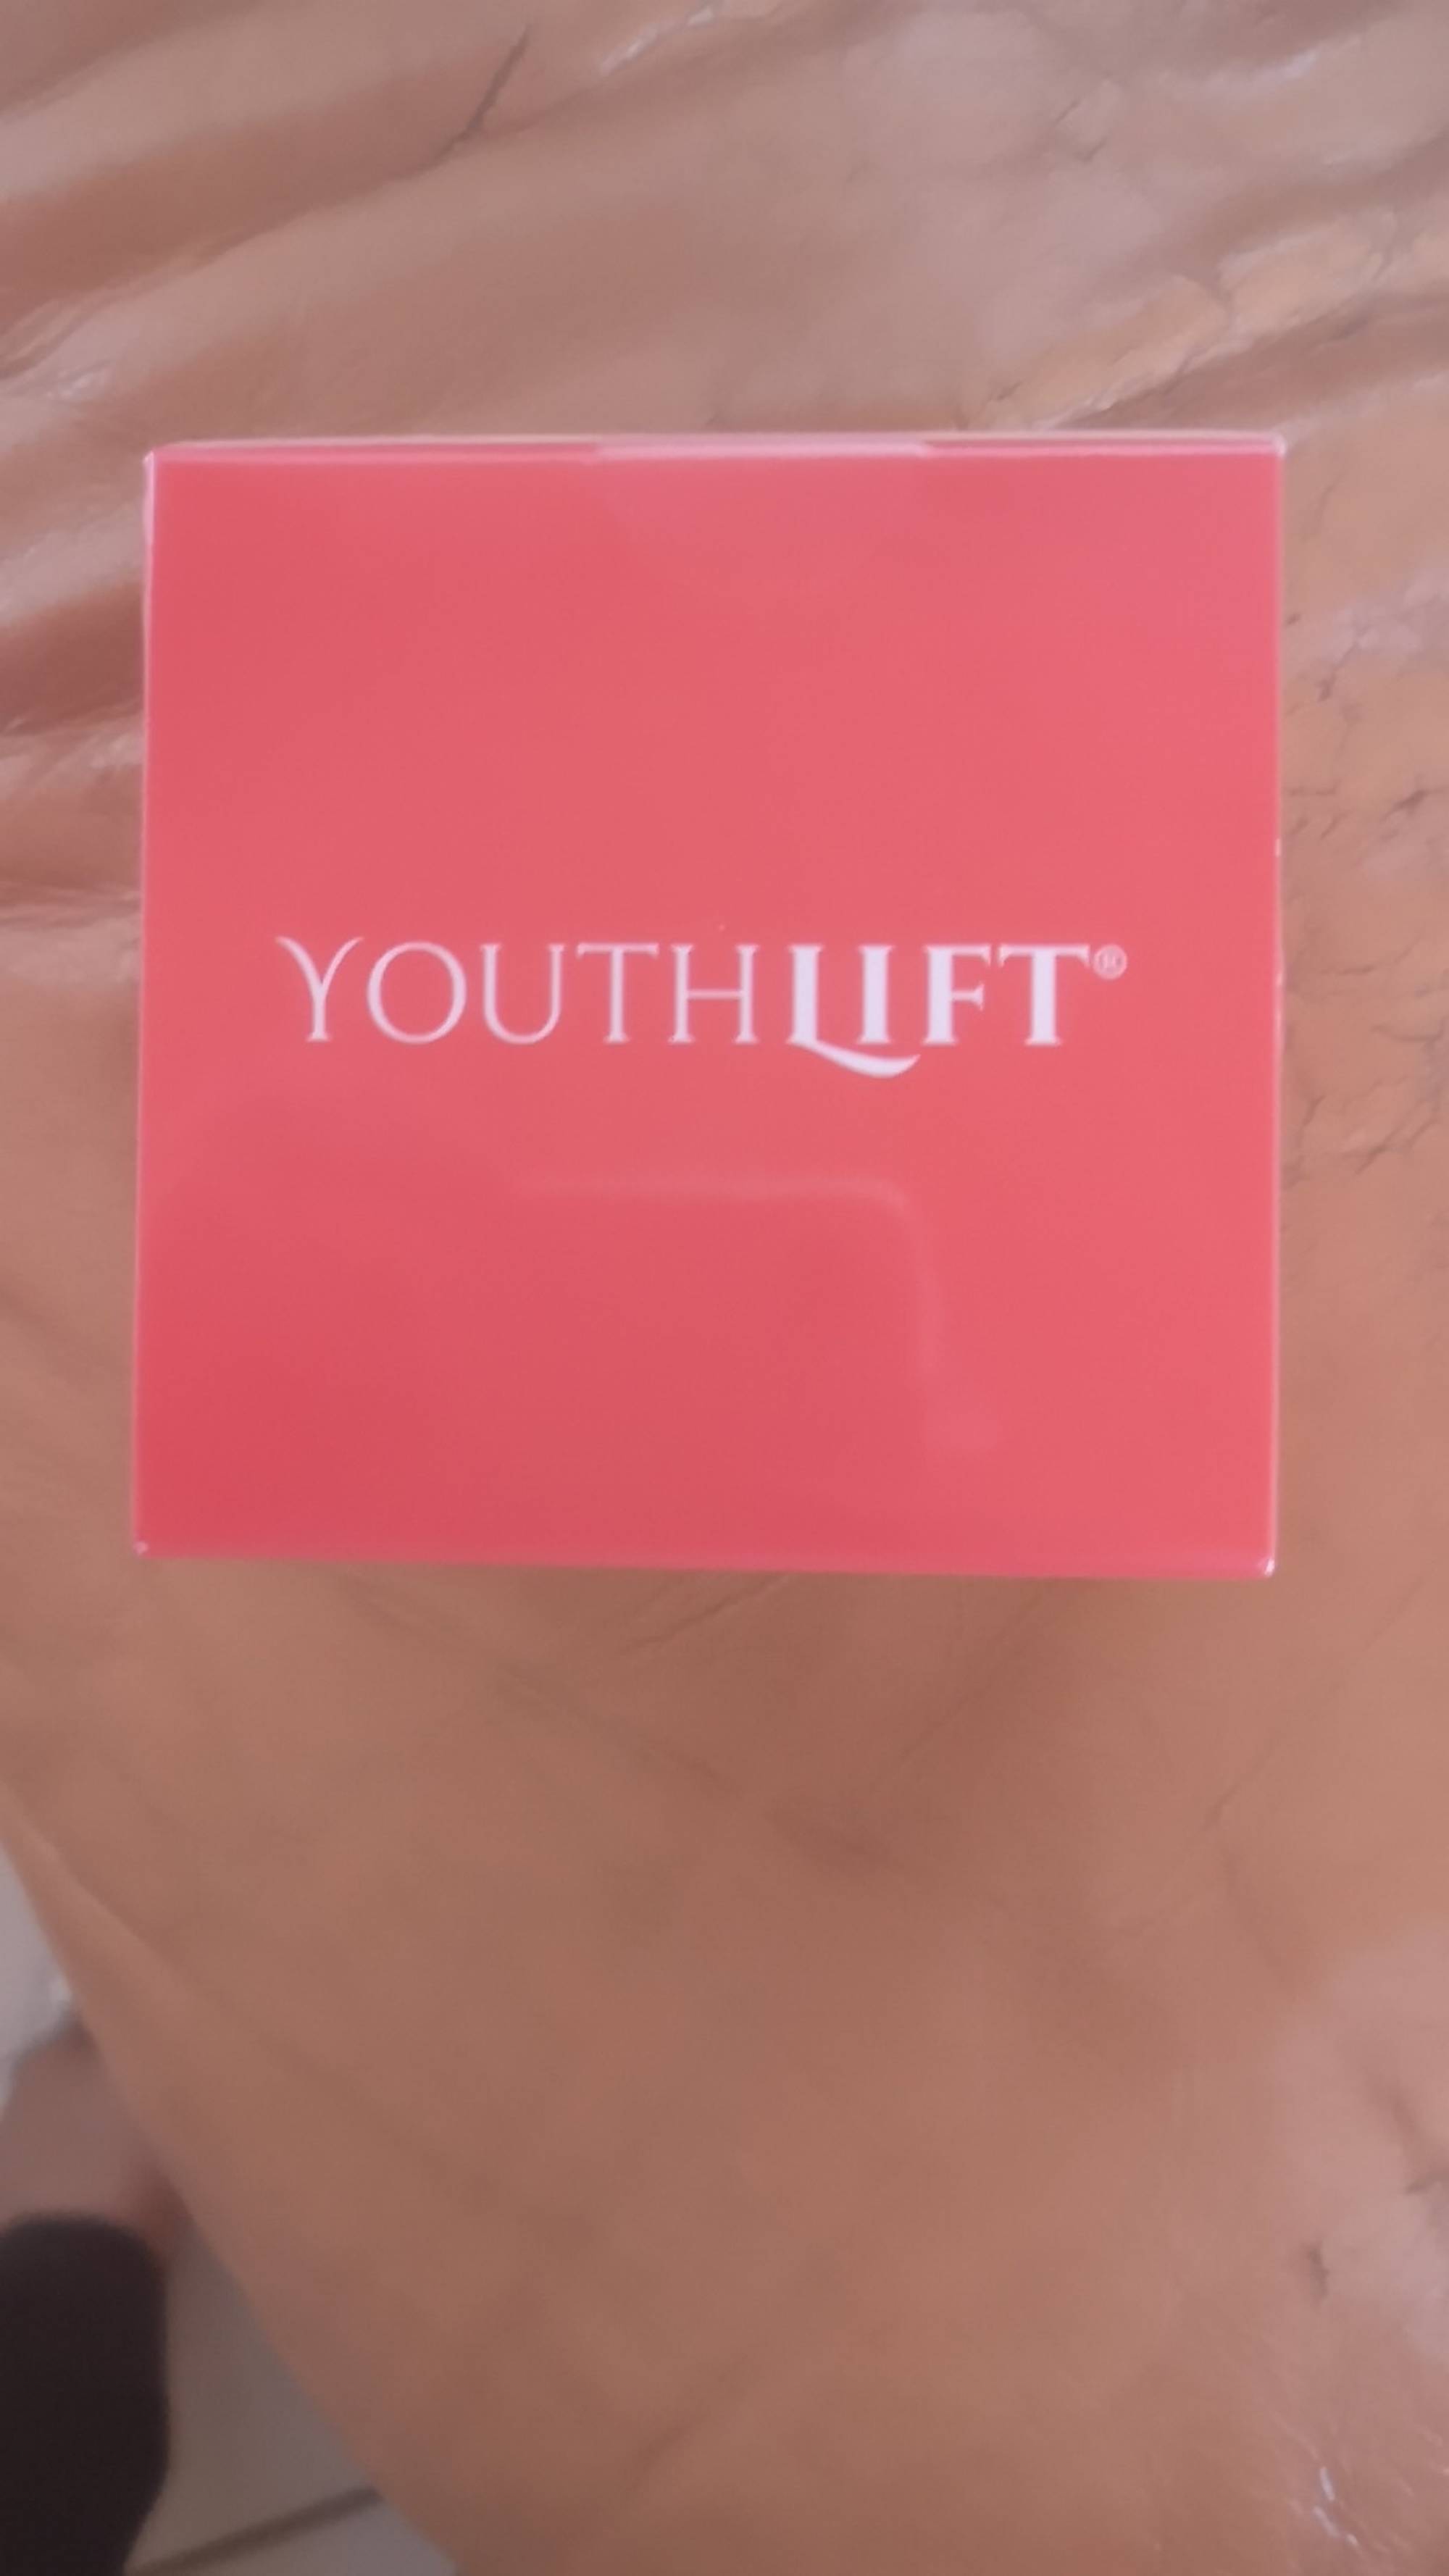 YOUTHLIFT - All in one solution cream